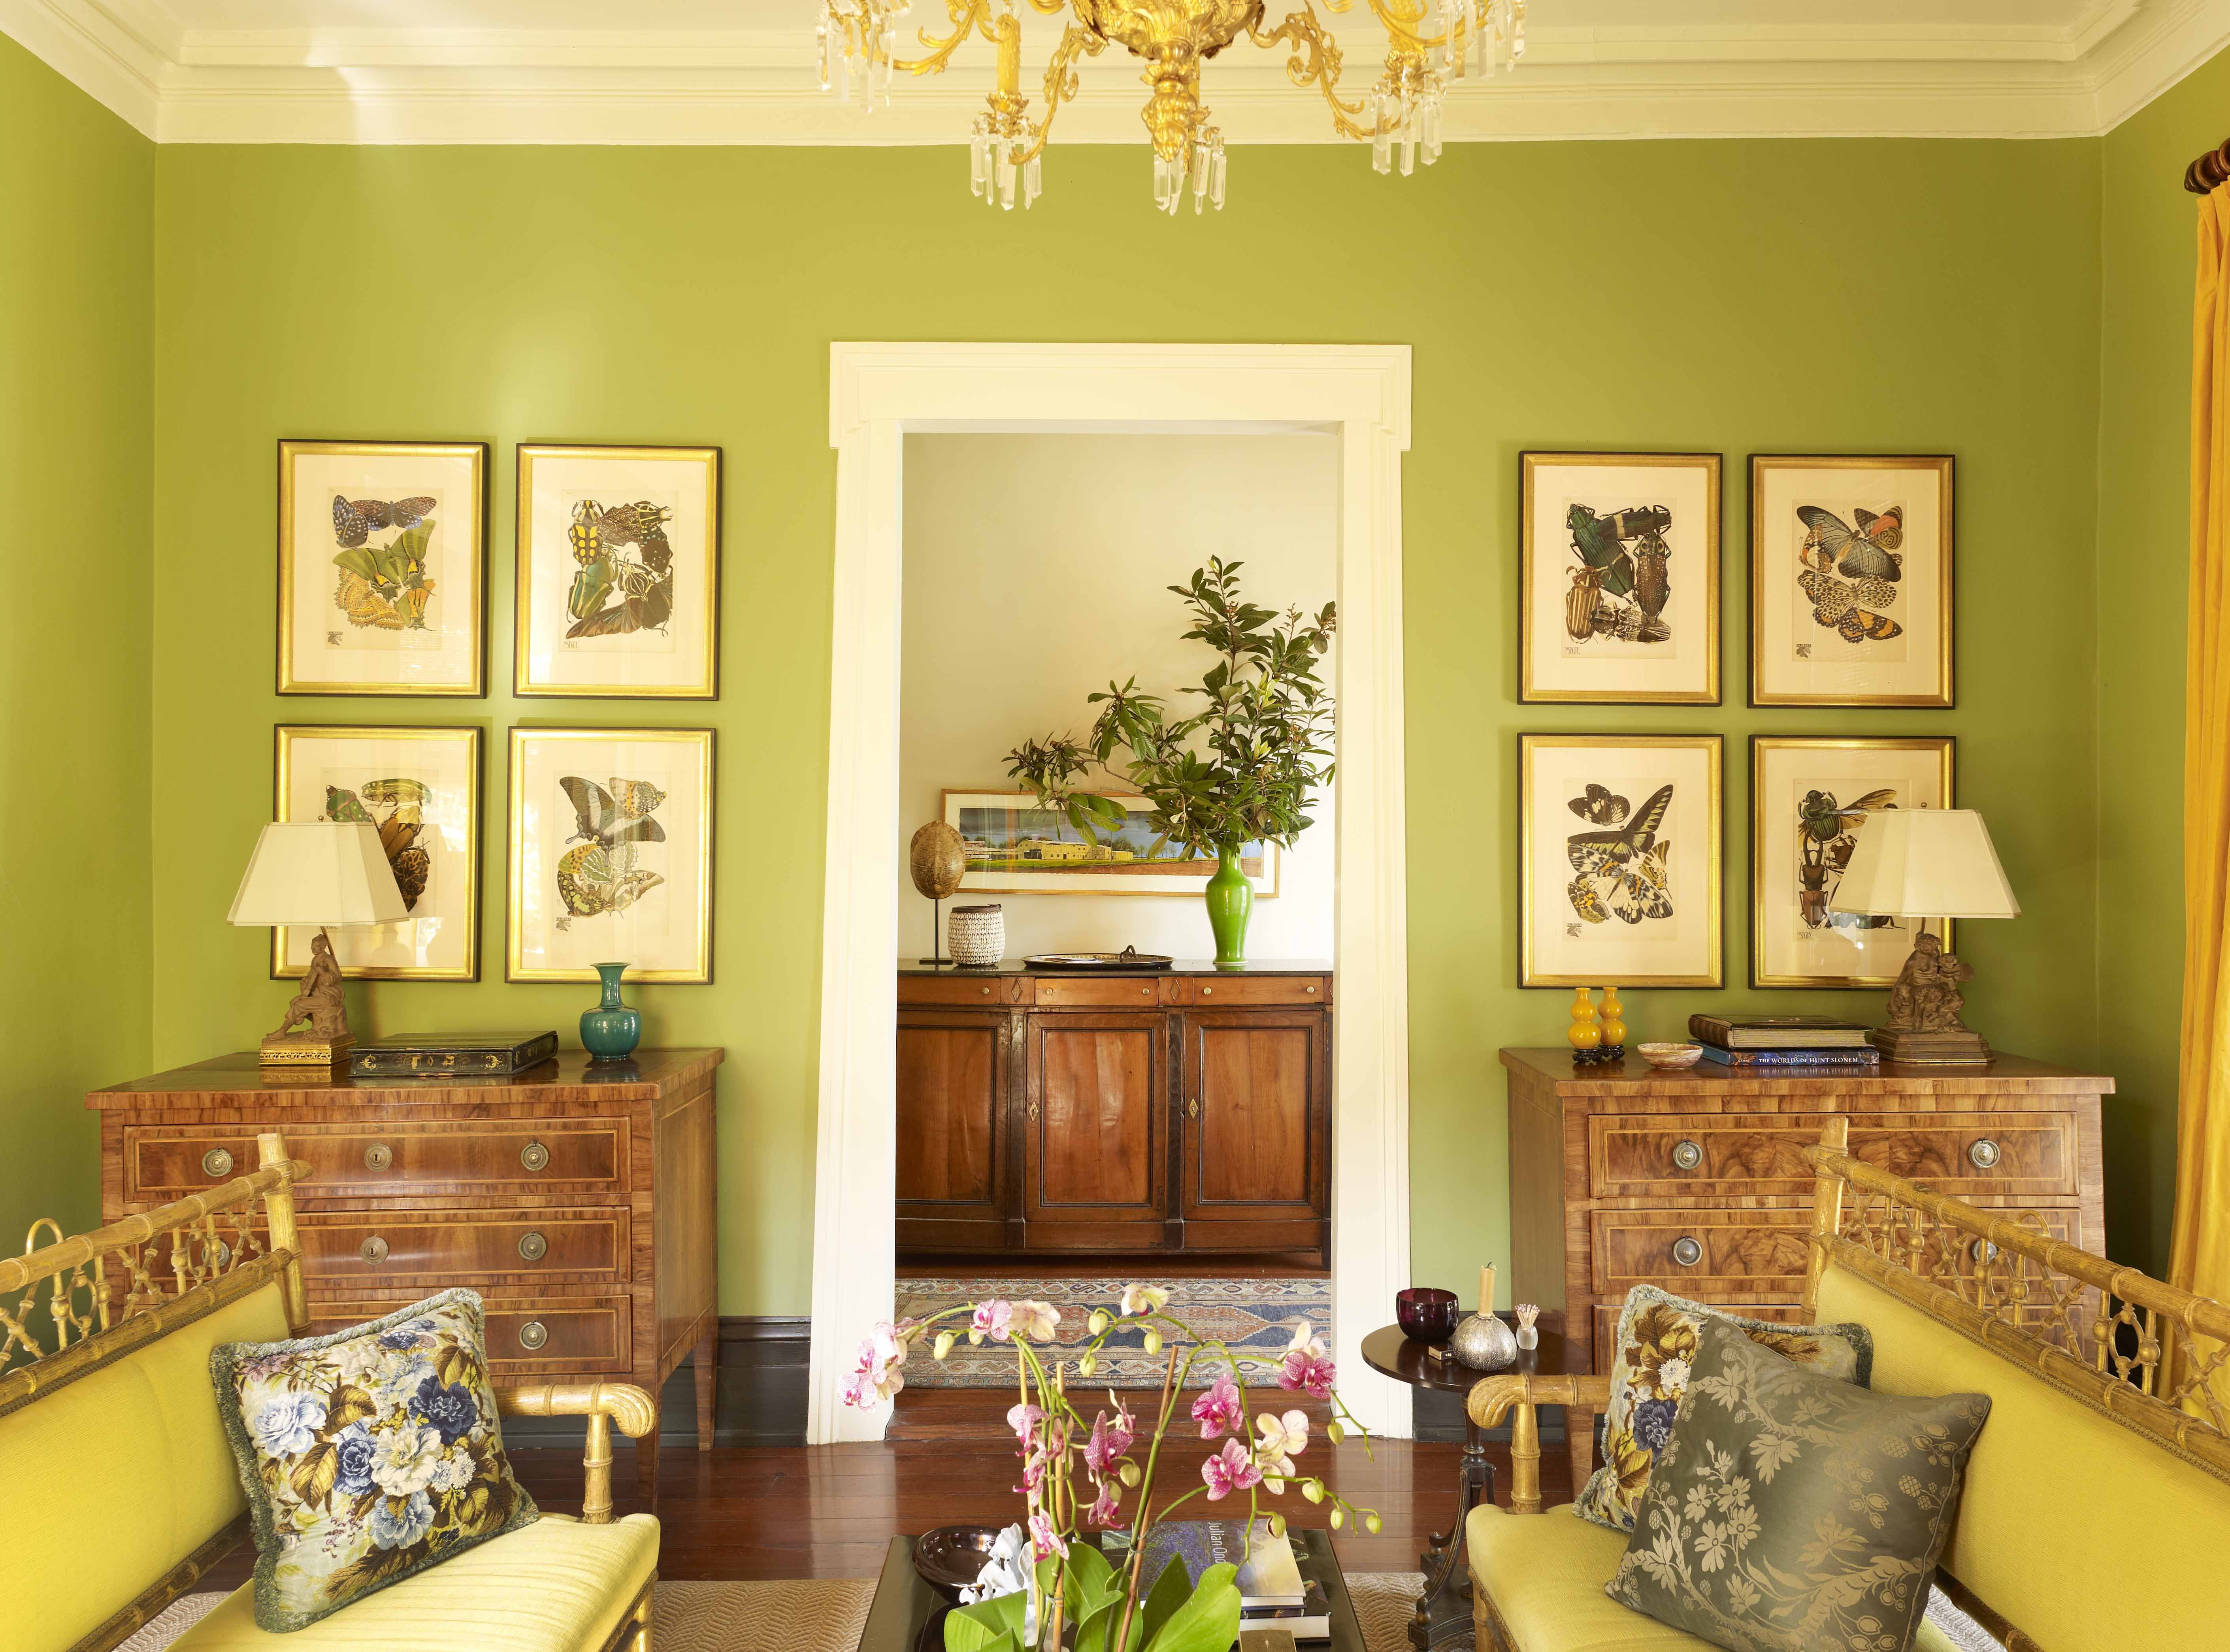 11 Best Chartreuse Color Ideas - Home Decorating with Chartreuse